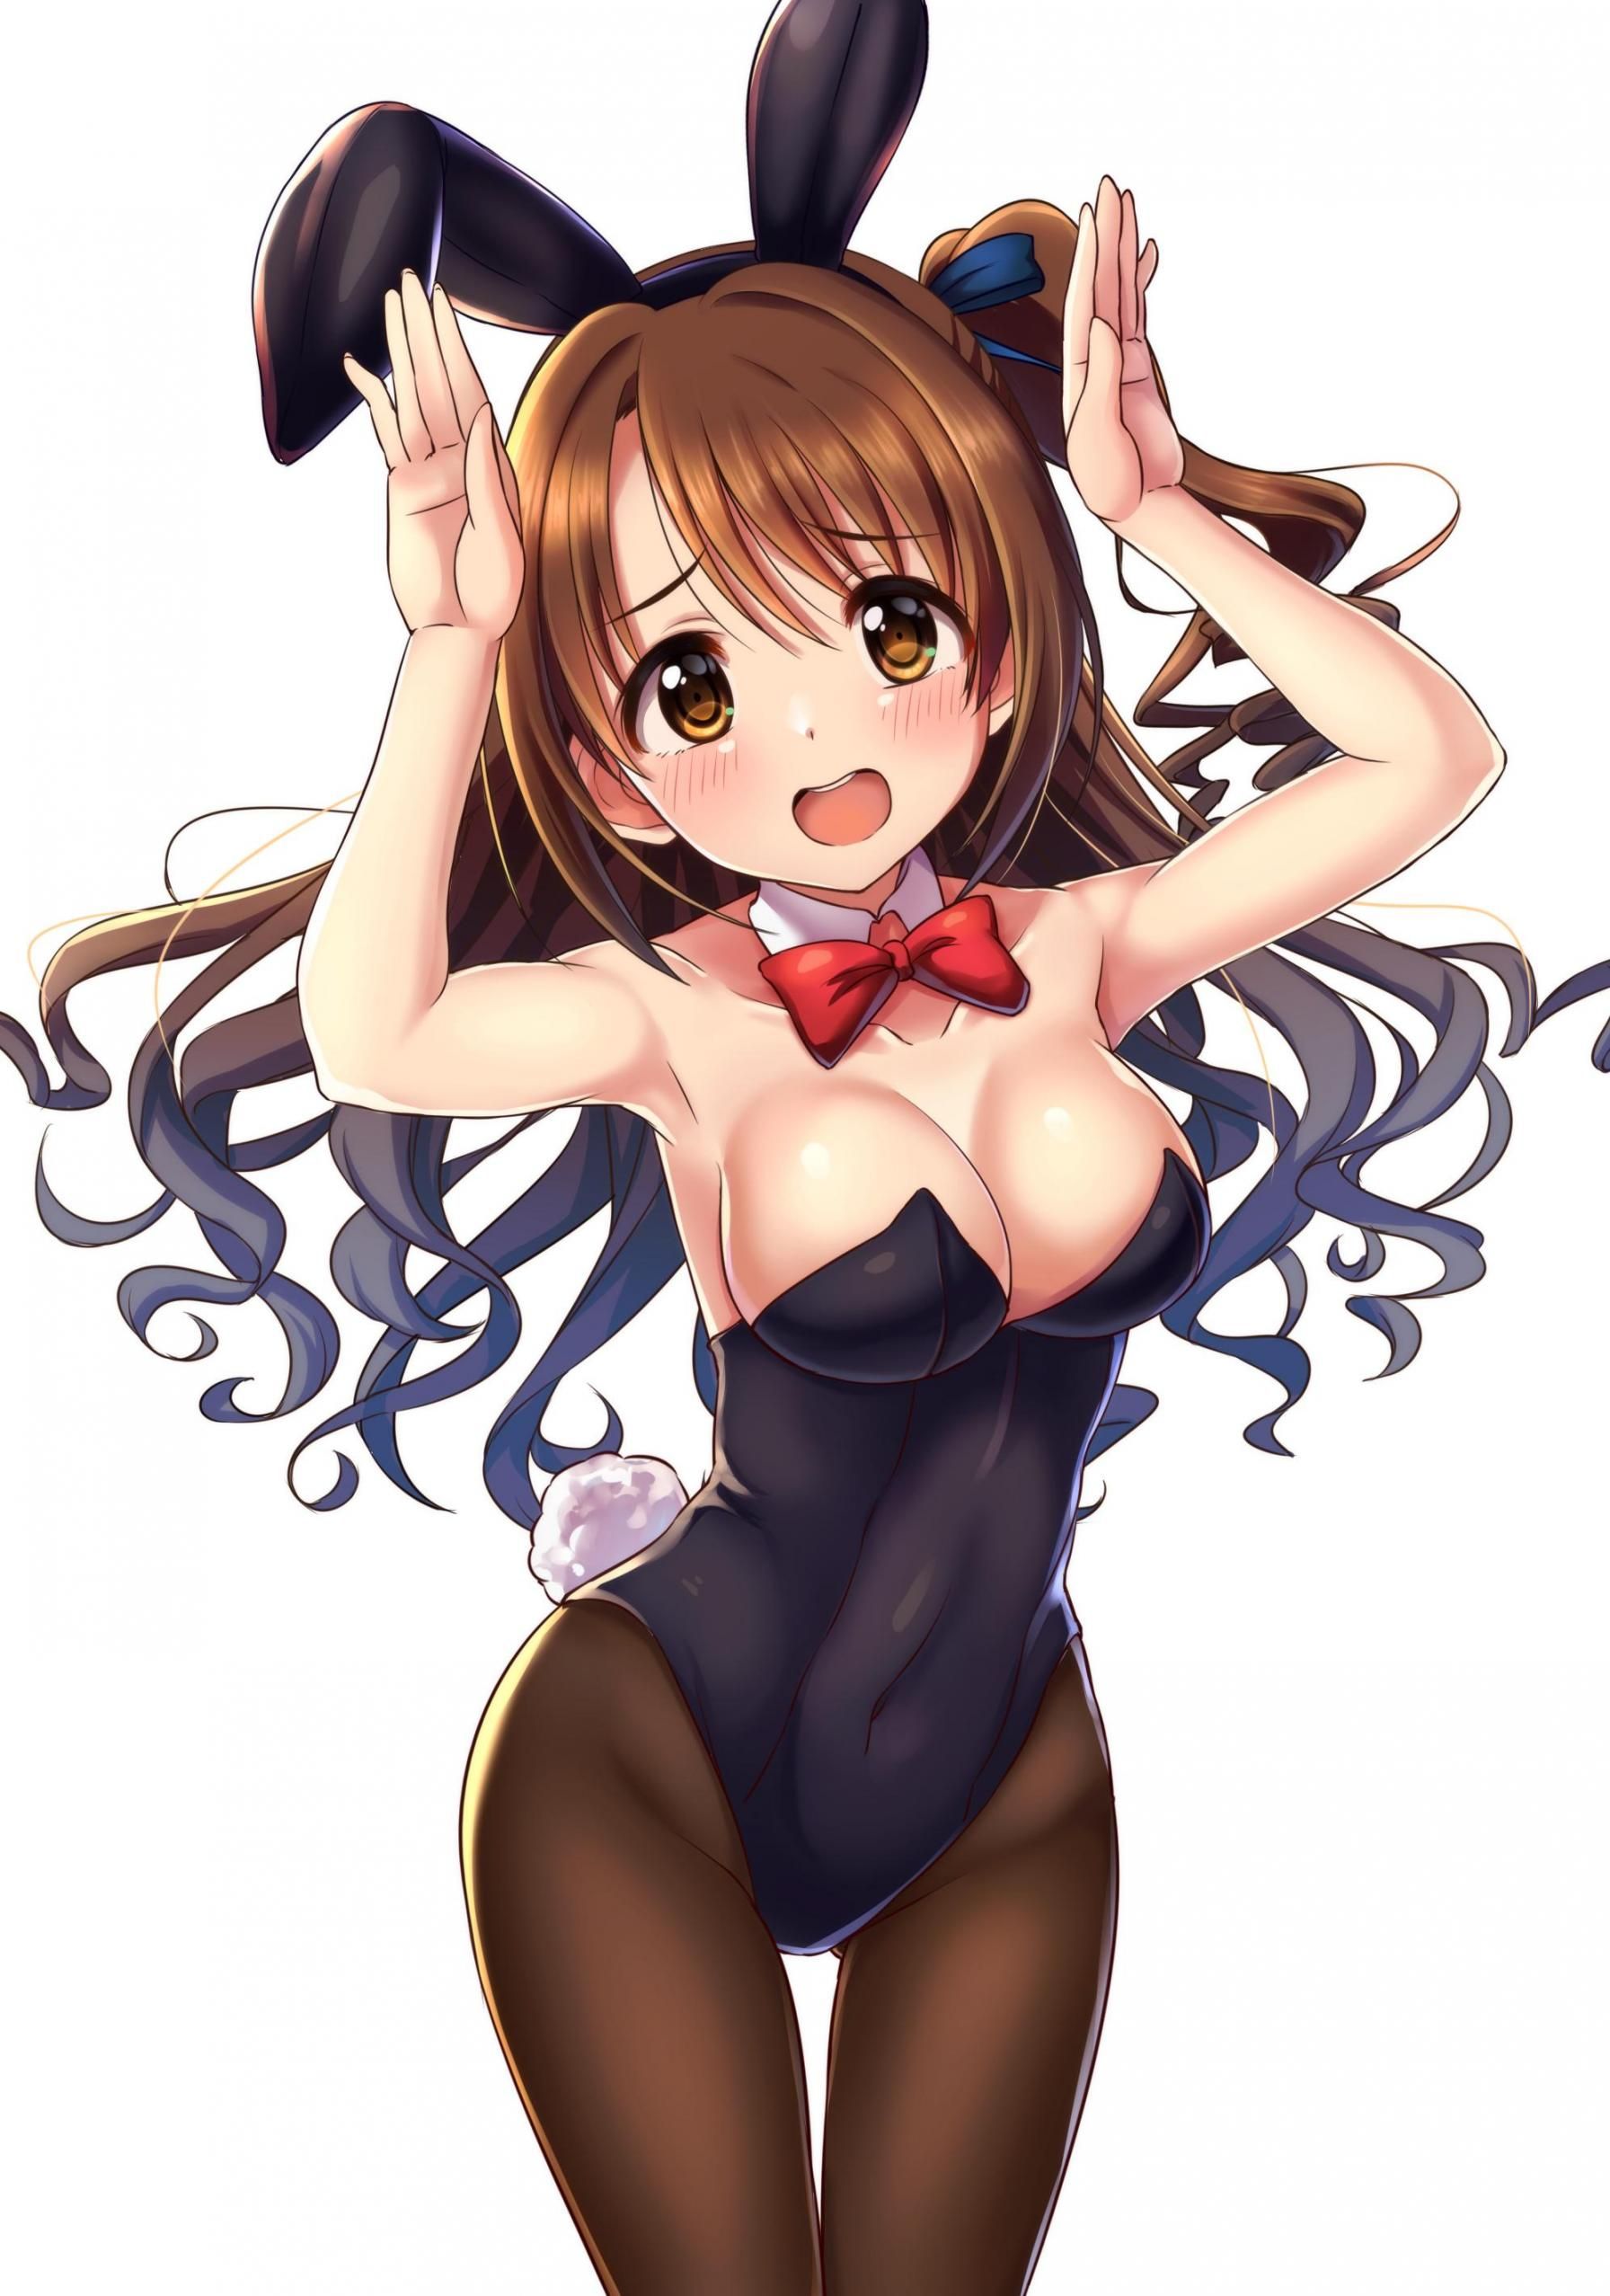 The second image of the bunny girl is too it. 15